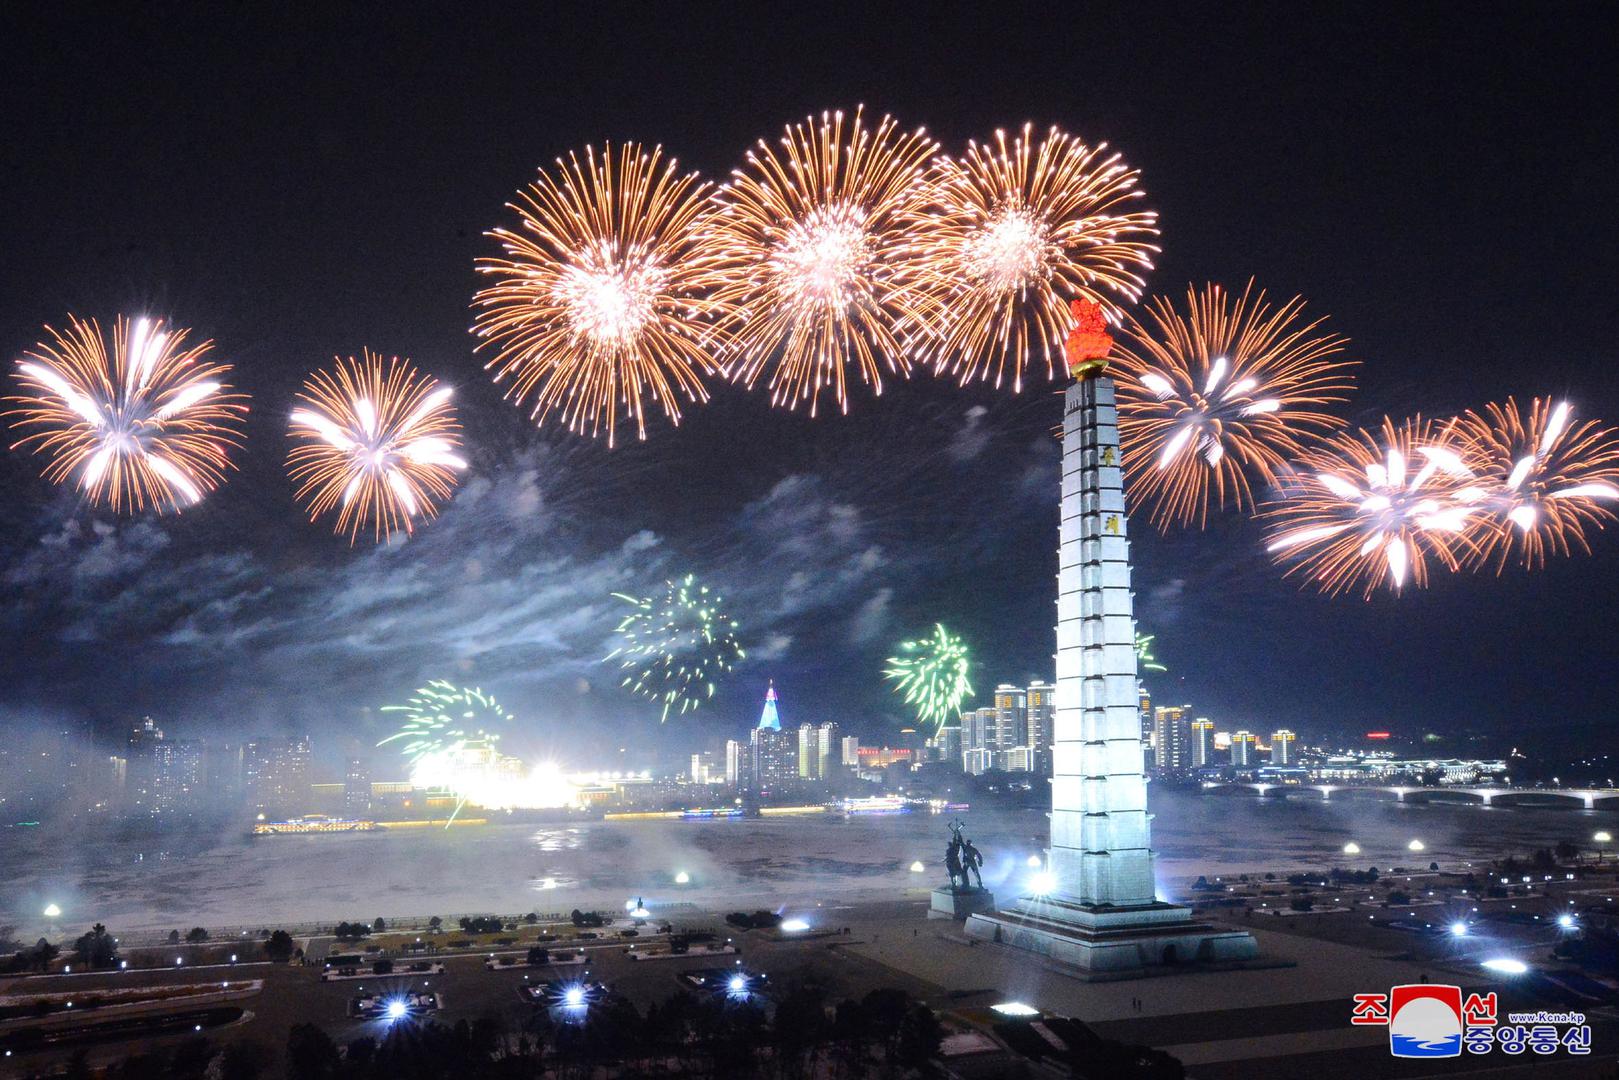 Fireworks to celebrate the 8th Congress of the Workers' Party in Pyongyang Fireworks explode above Kim Il Sung Square in Pyongyang, North Korea January 14, 2021 to celebrate the 8th Congress of the Workers' Party in this photo supplied by North Korea's Central News Agency (KCNA).    KCNA via REUTERS    ATTENTION EDITORS - THIS IMAGE WAS PROVIDED BY A THIRD PARTY. REUTERS IS UNABLE TO INDEPENDENTLY VERIFY THIS IMAGE. NO THIRD PARTY SALES. SOUTH KOREA OUT. NO COMMERCIAL OR EDITORIAL SALES IN SOUTH KOREA. KCNA